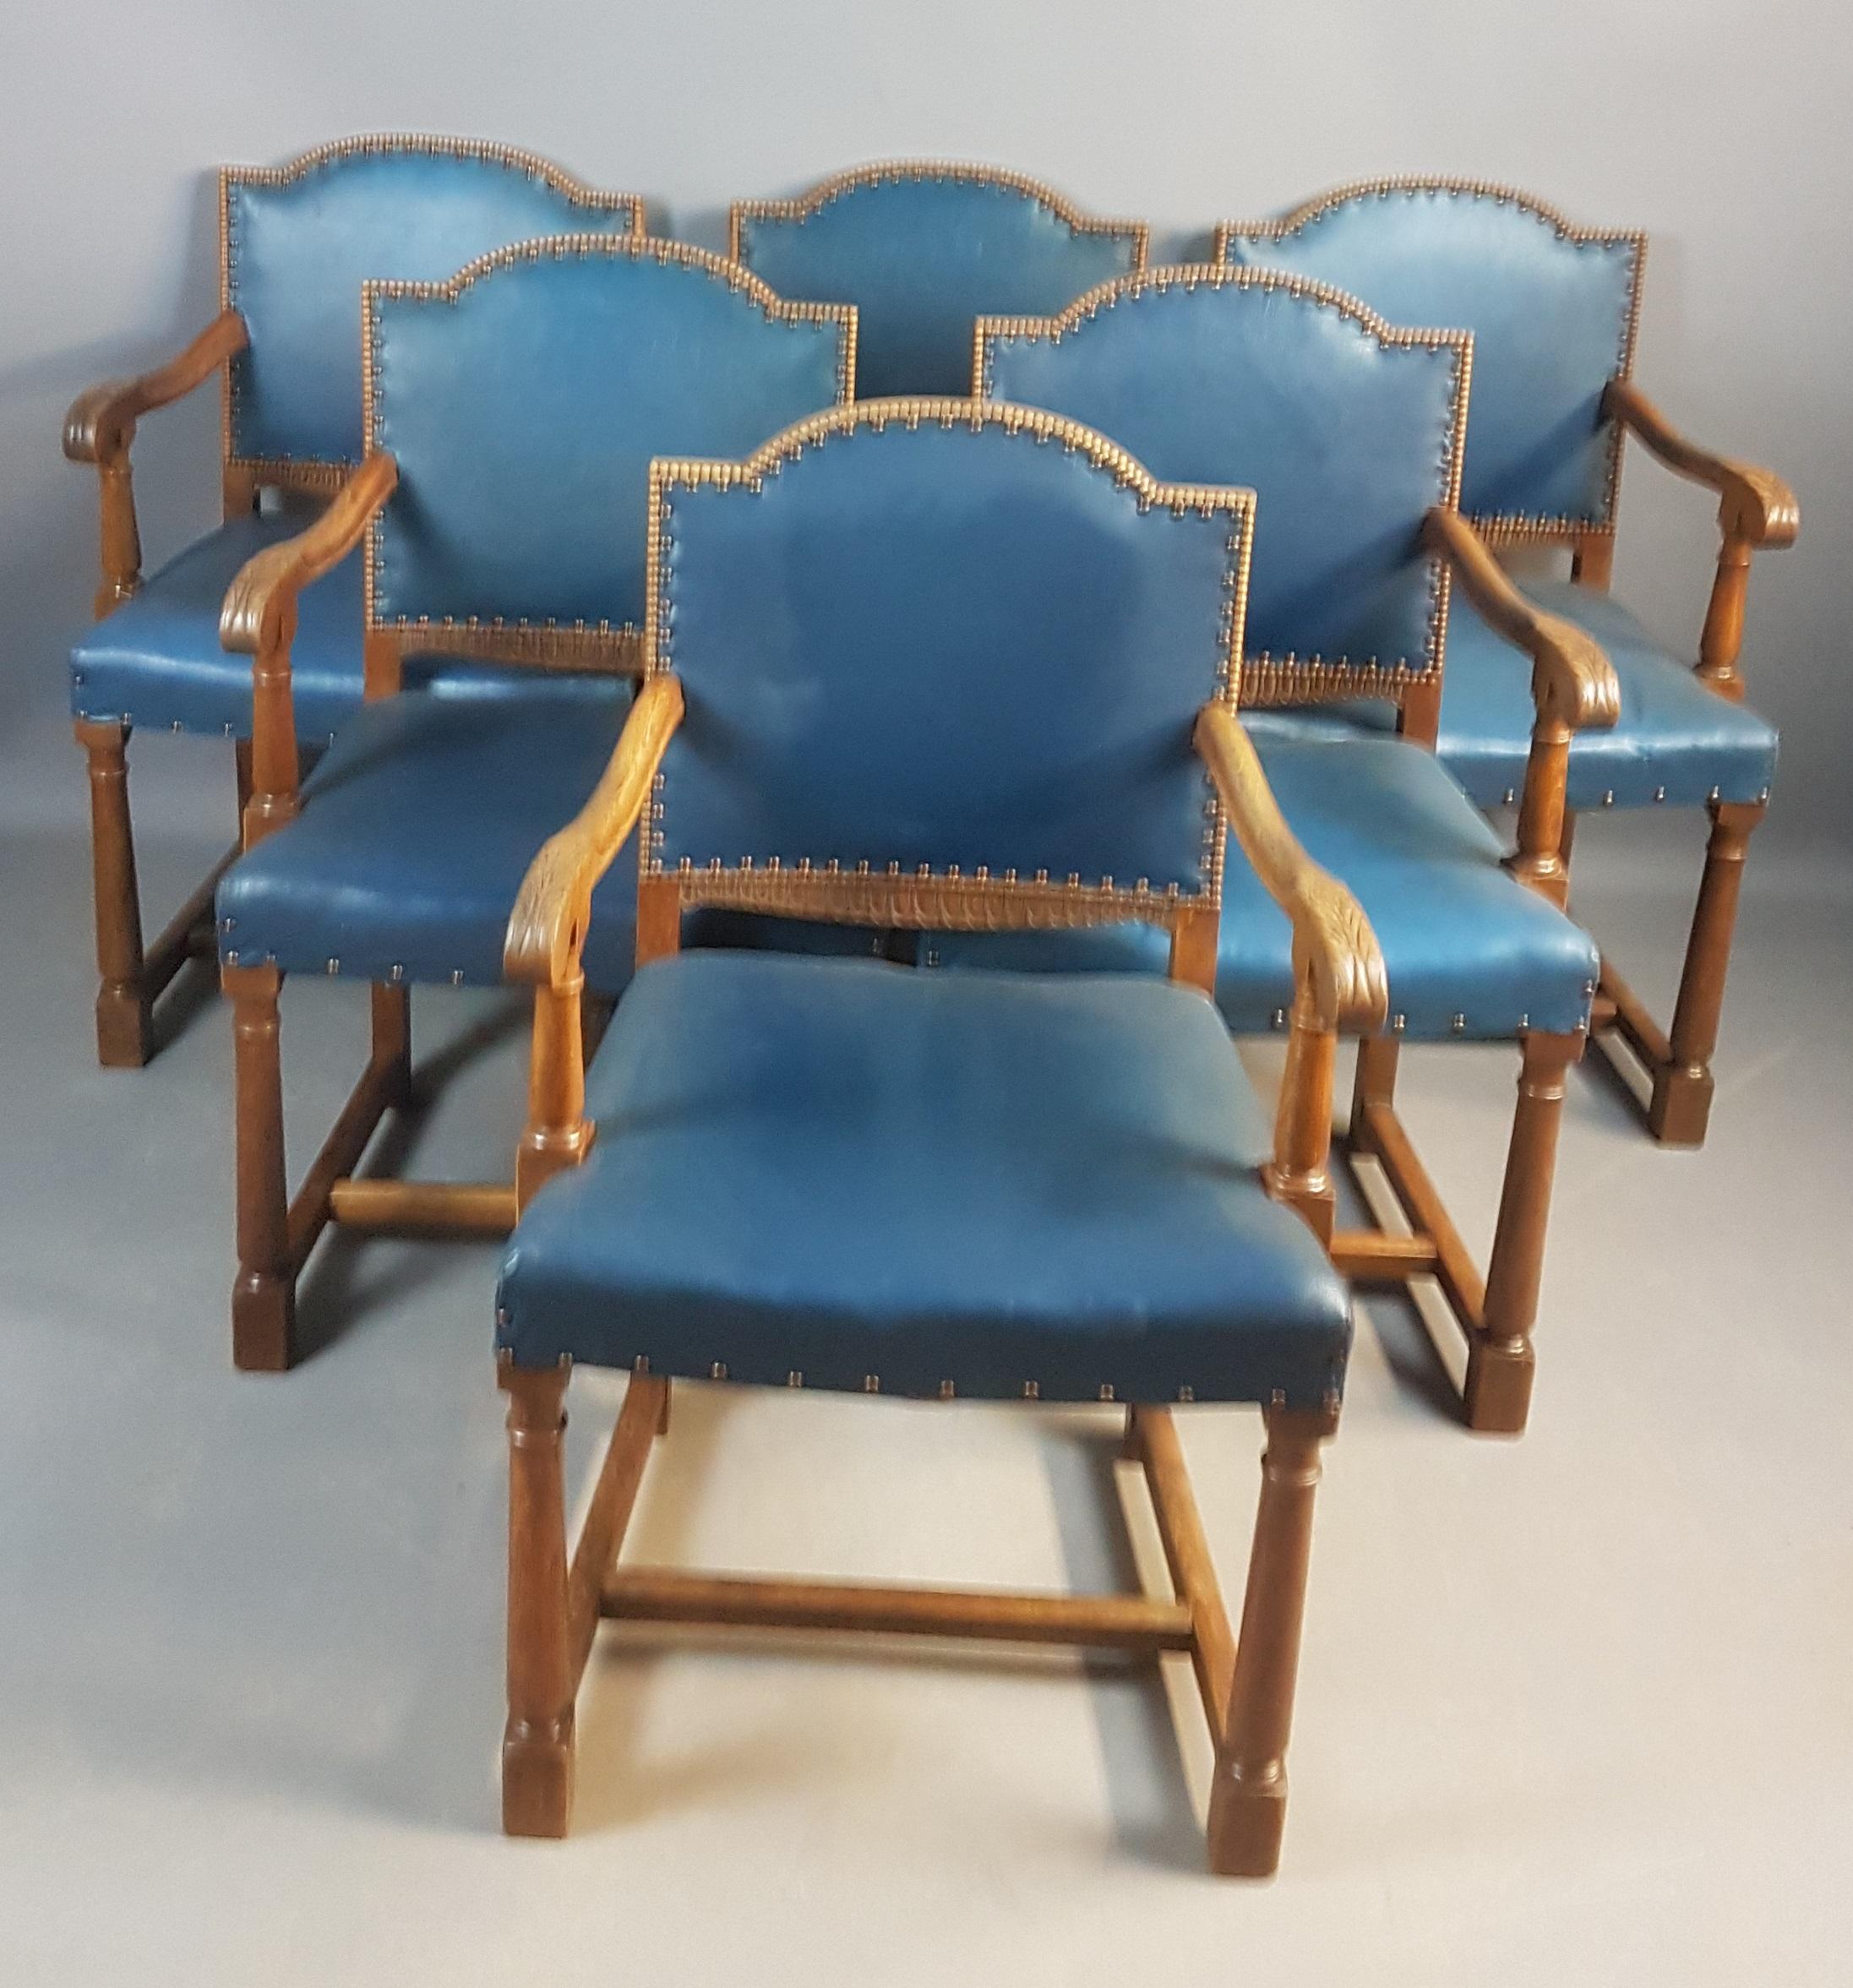 A very nice set of 6 oak armchairs of generous proportions, carved back sections and carved leafs on the arms. The arms and legs have reverse taper gun barrel turnings. The chairs are covered in regal blue leatherette that does have a few marks but